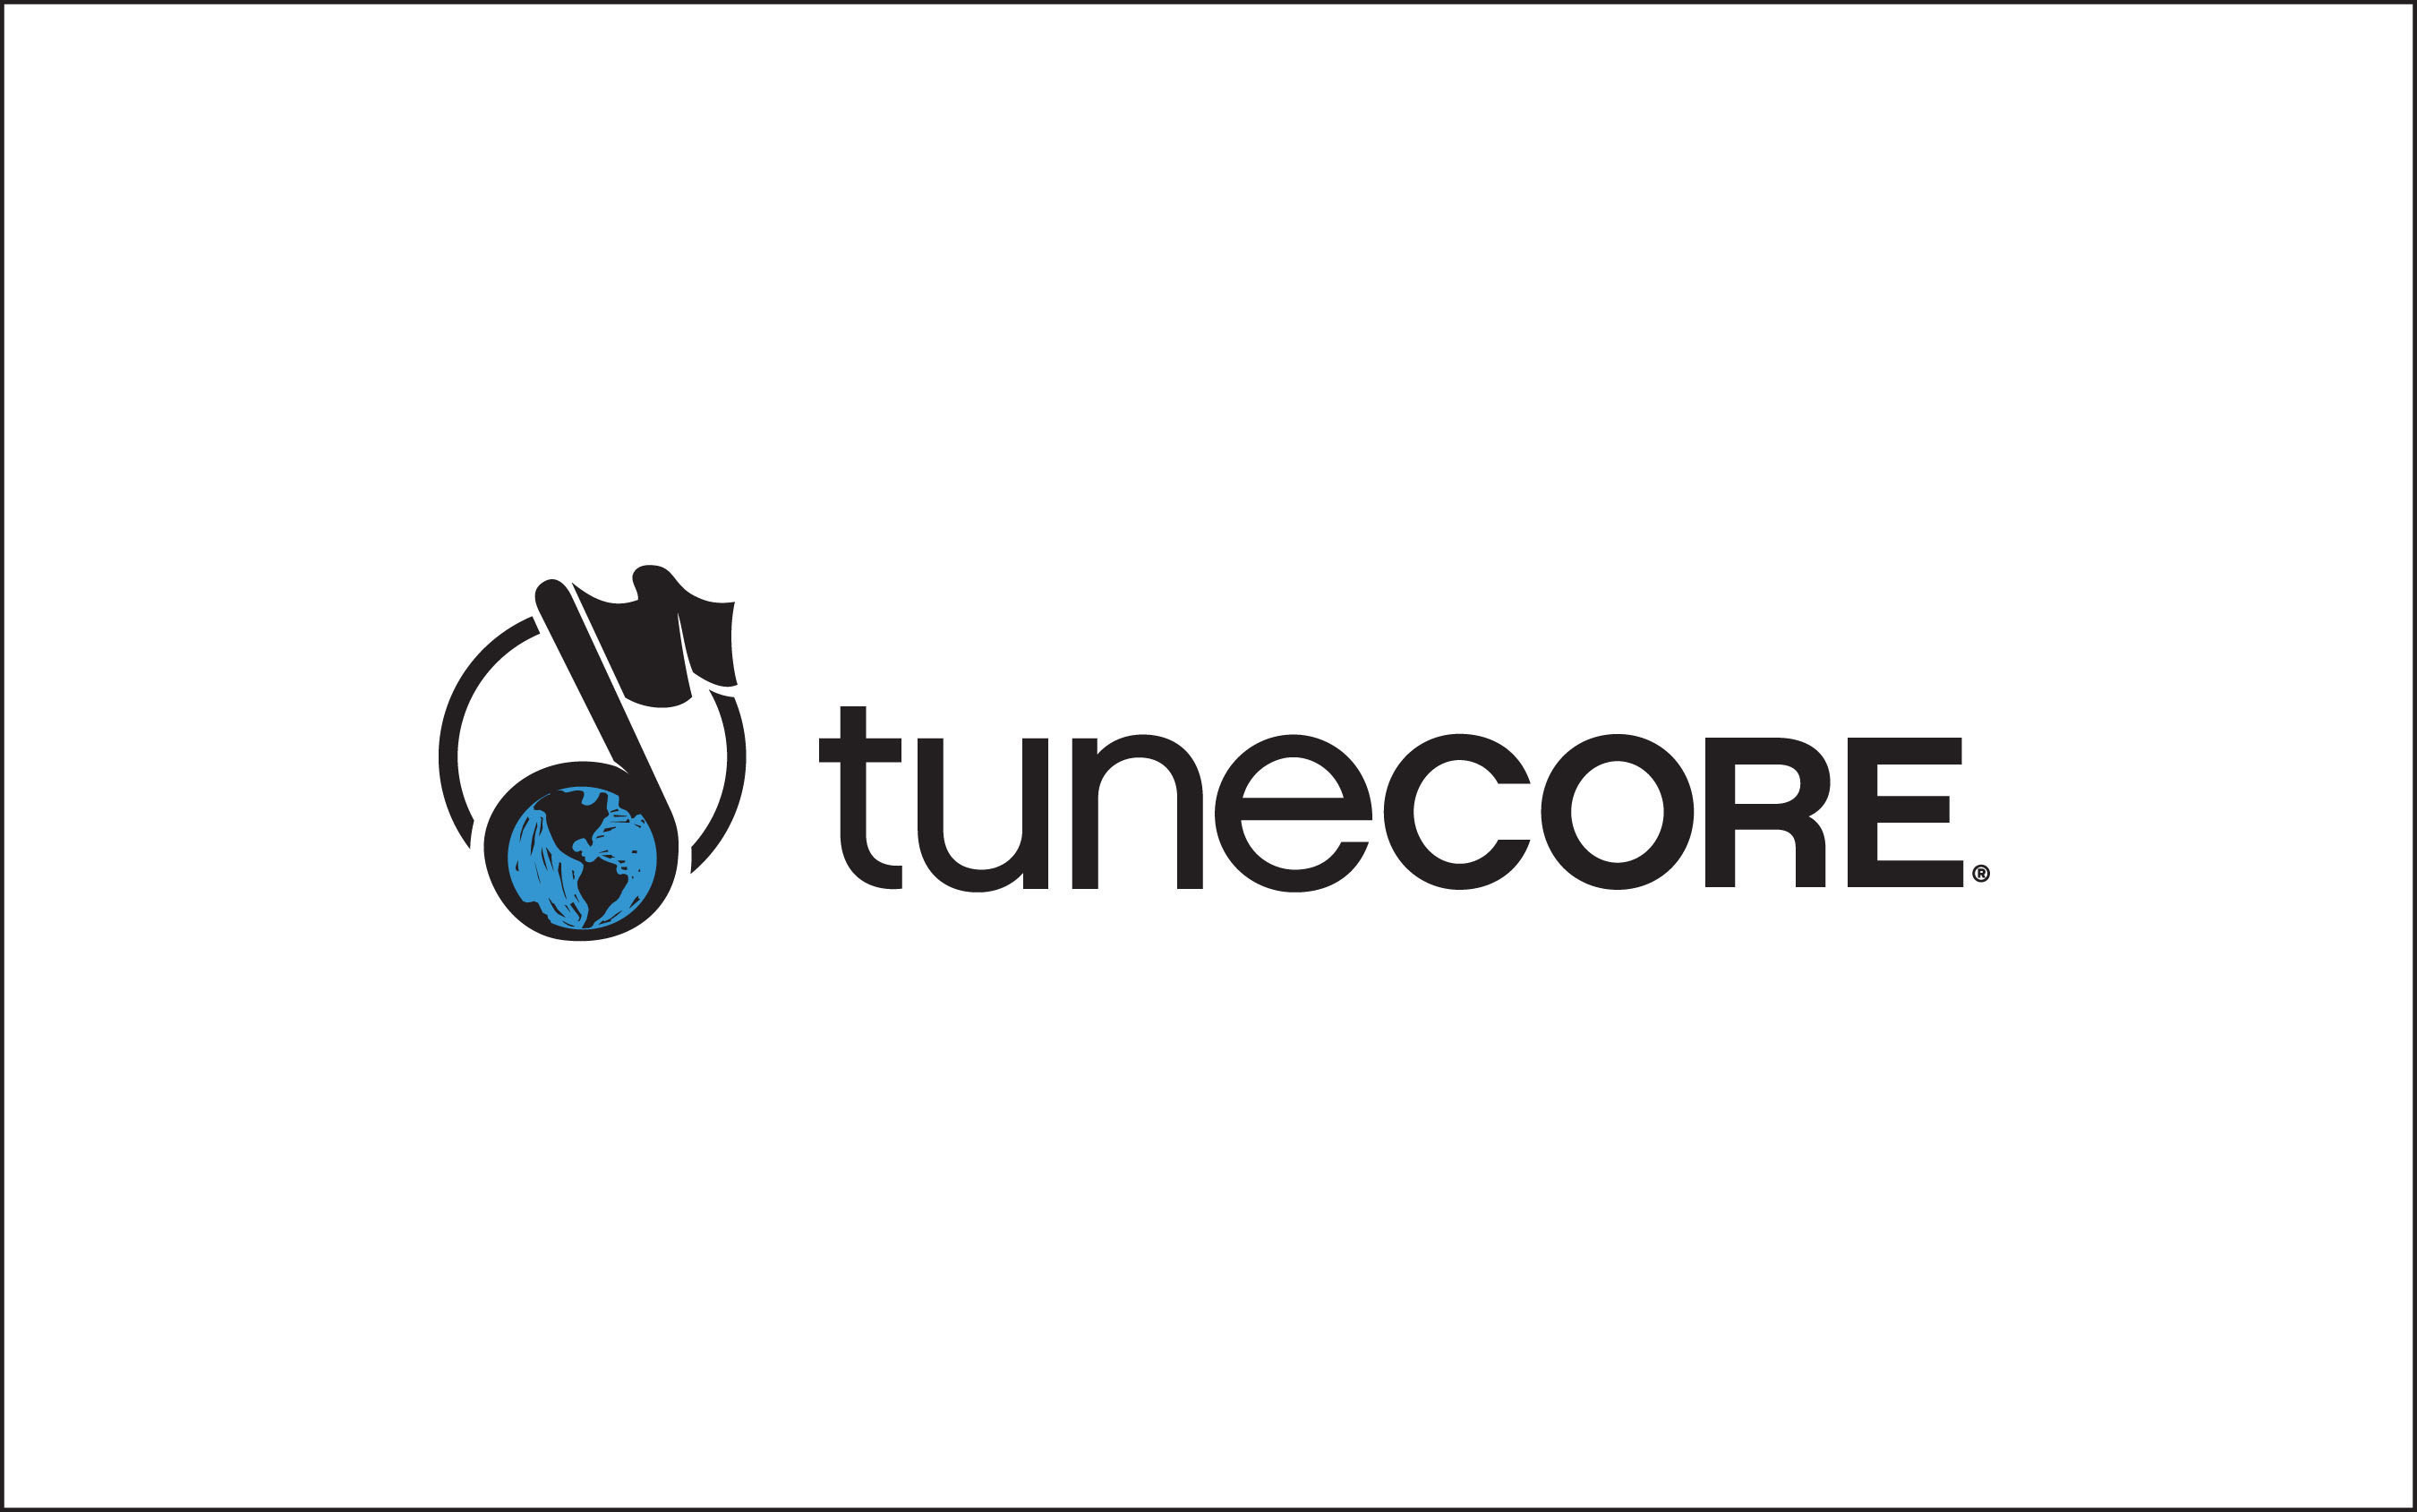 TuneCore brings more music to more people, while helping musicians and songwriters increase money-earning opportunities and take charge of their own careers. The company has one of the highest artist revenue-generating music catalogs in the world, earning TuneCore Artists $504 million on 12 billion streams and downloads since inception. TuneCore Music Distribution helps artists, labels and managers sell their music through iTunes, Amazon MP3, Spotify and other major download and streaming sites while retaining 100% of their sales revenue. TuneCore Music Publishing Administration assists songwriters by administering their compositions through licensing, registration and worldwide royalty collection, including YouTube monetization.